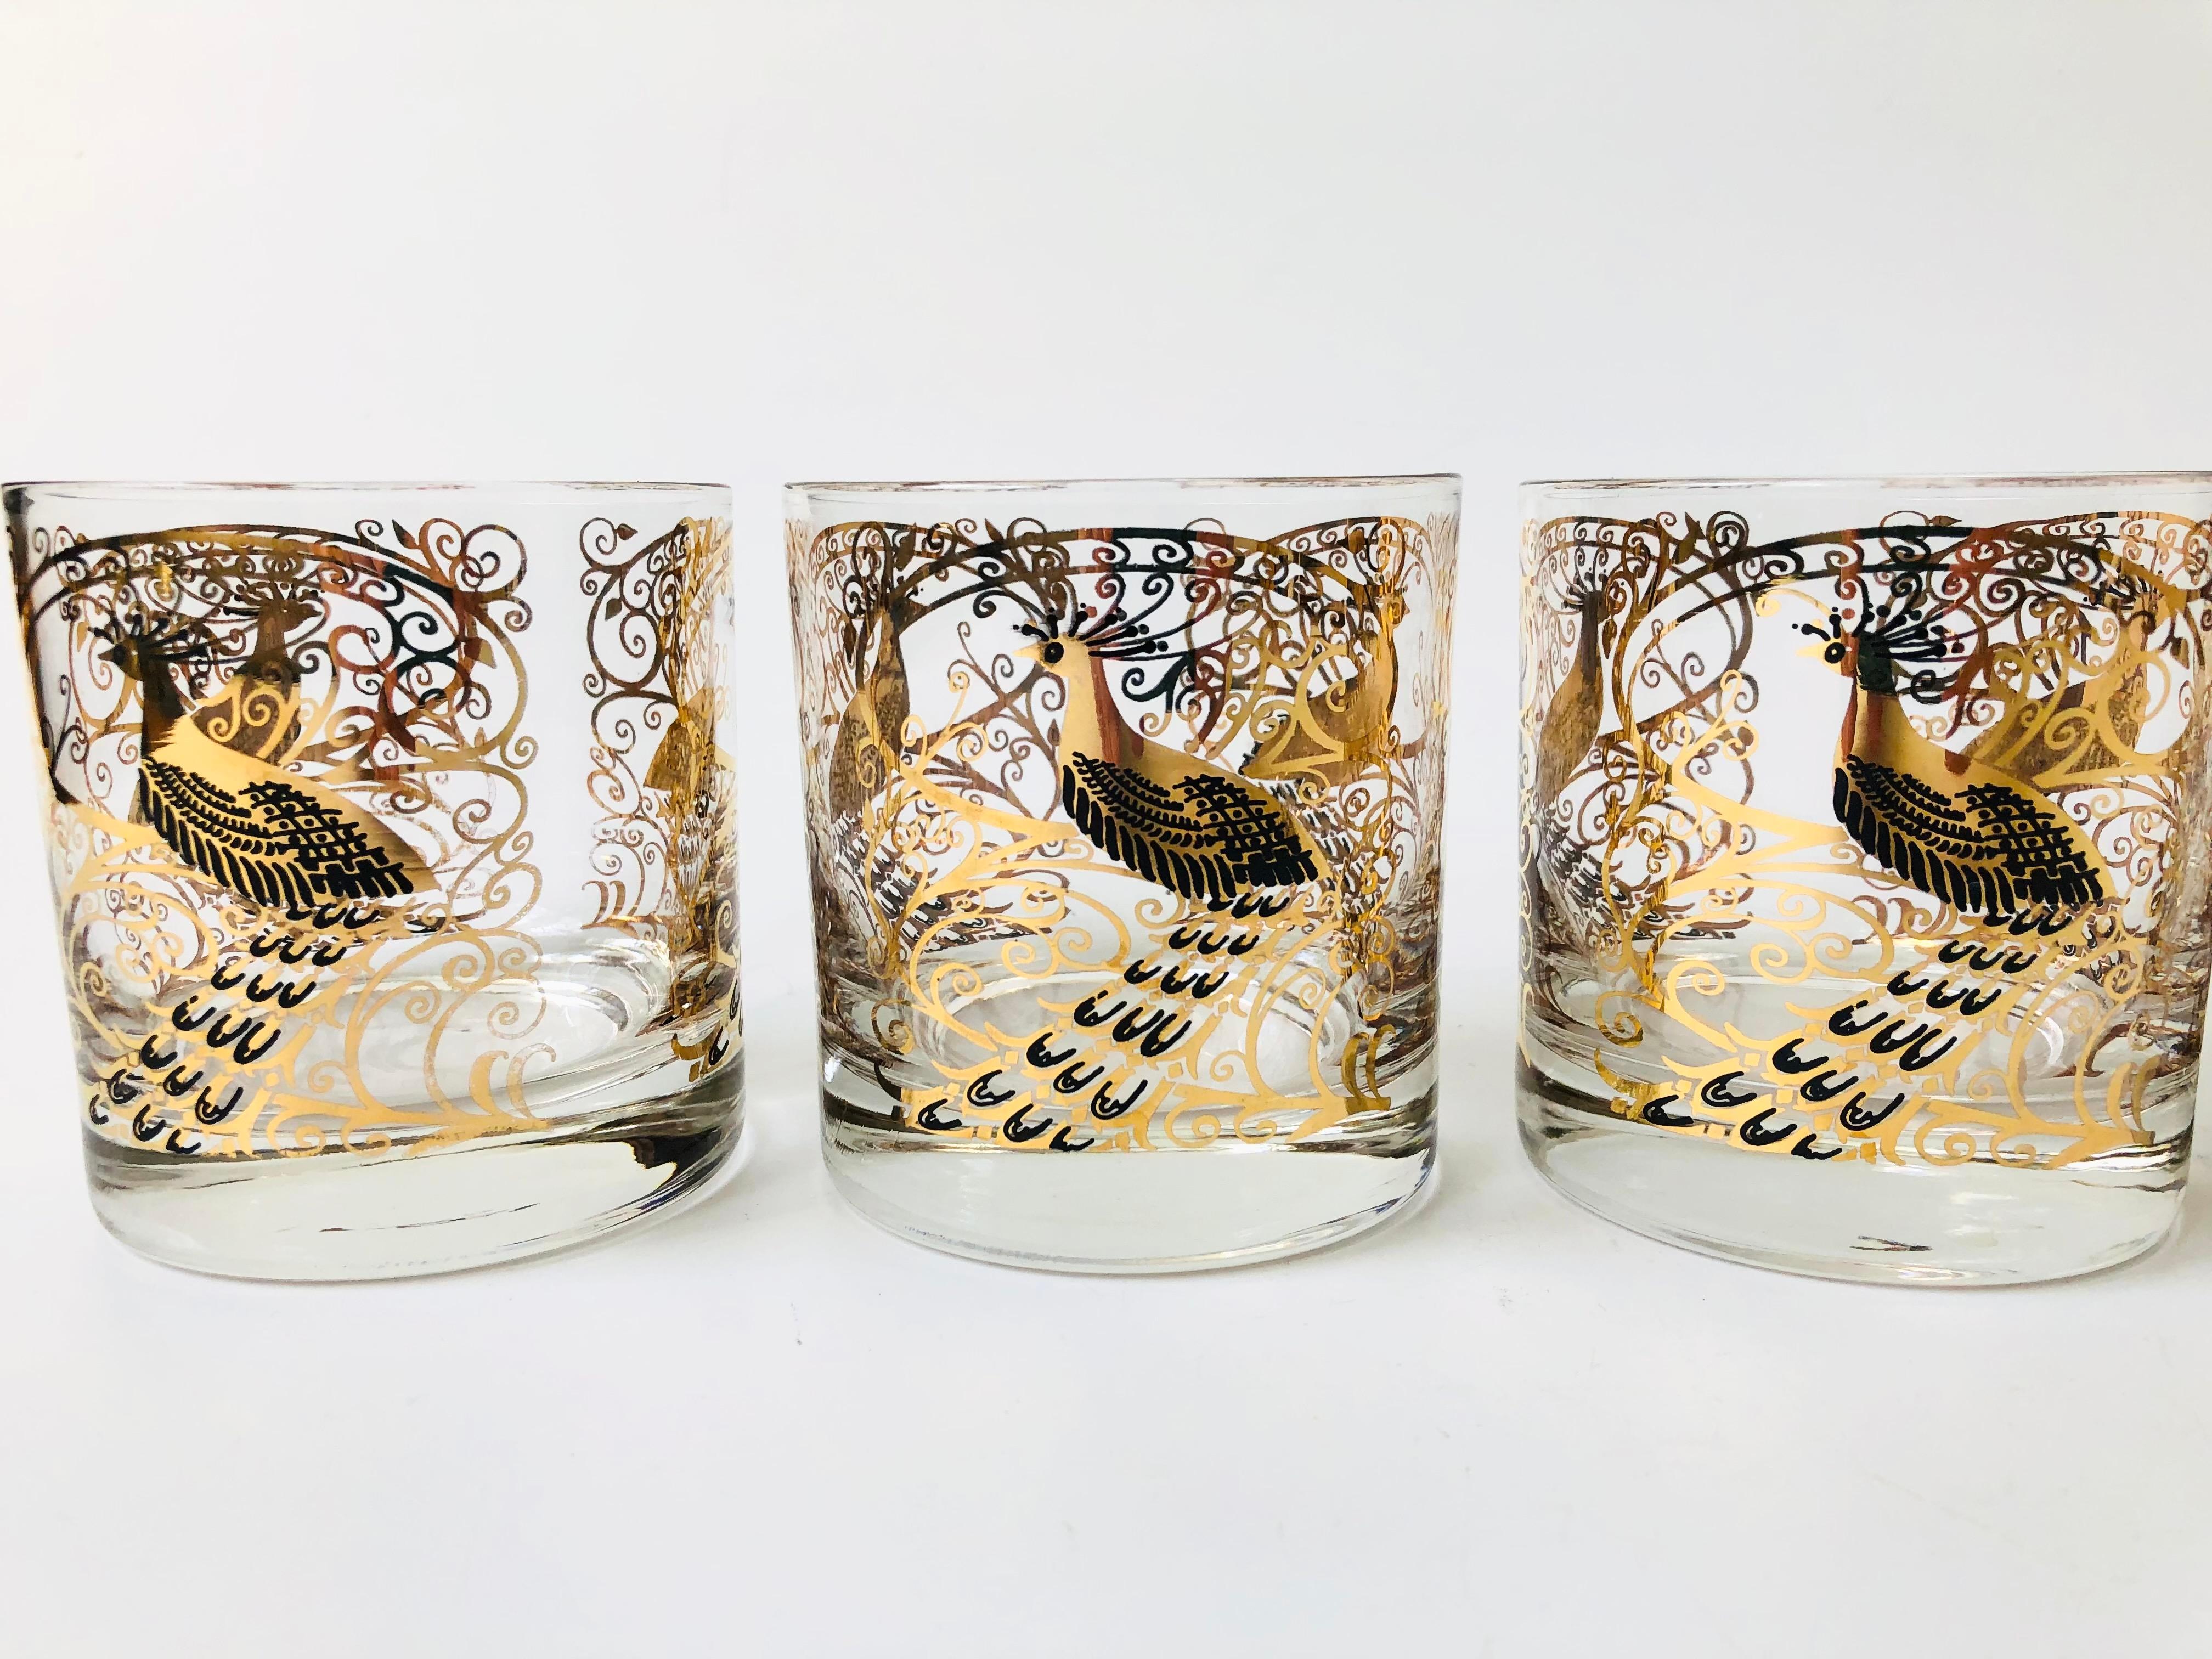 A gorgeous set of 4 mid century lowball cocktail glasses. Each piece is decorated in an ornate peacock pattern in black and metallic gold. Made by Osborne Kemper Thomas.

